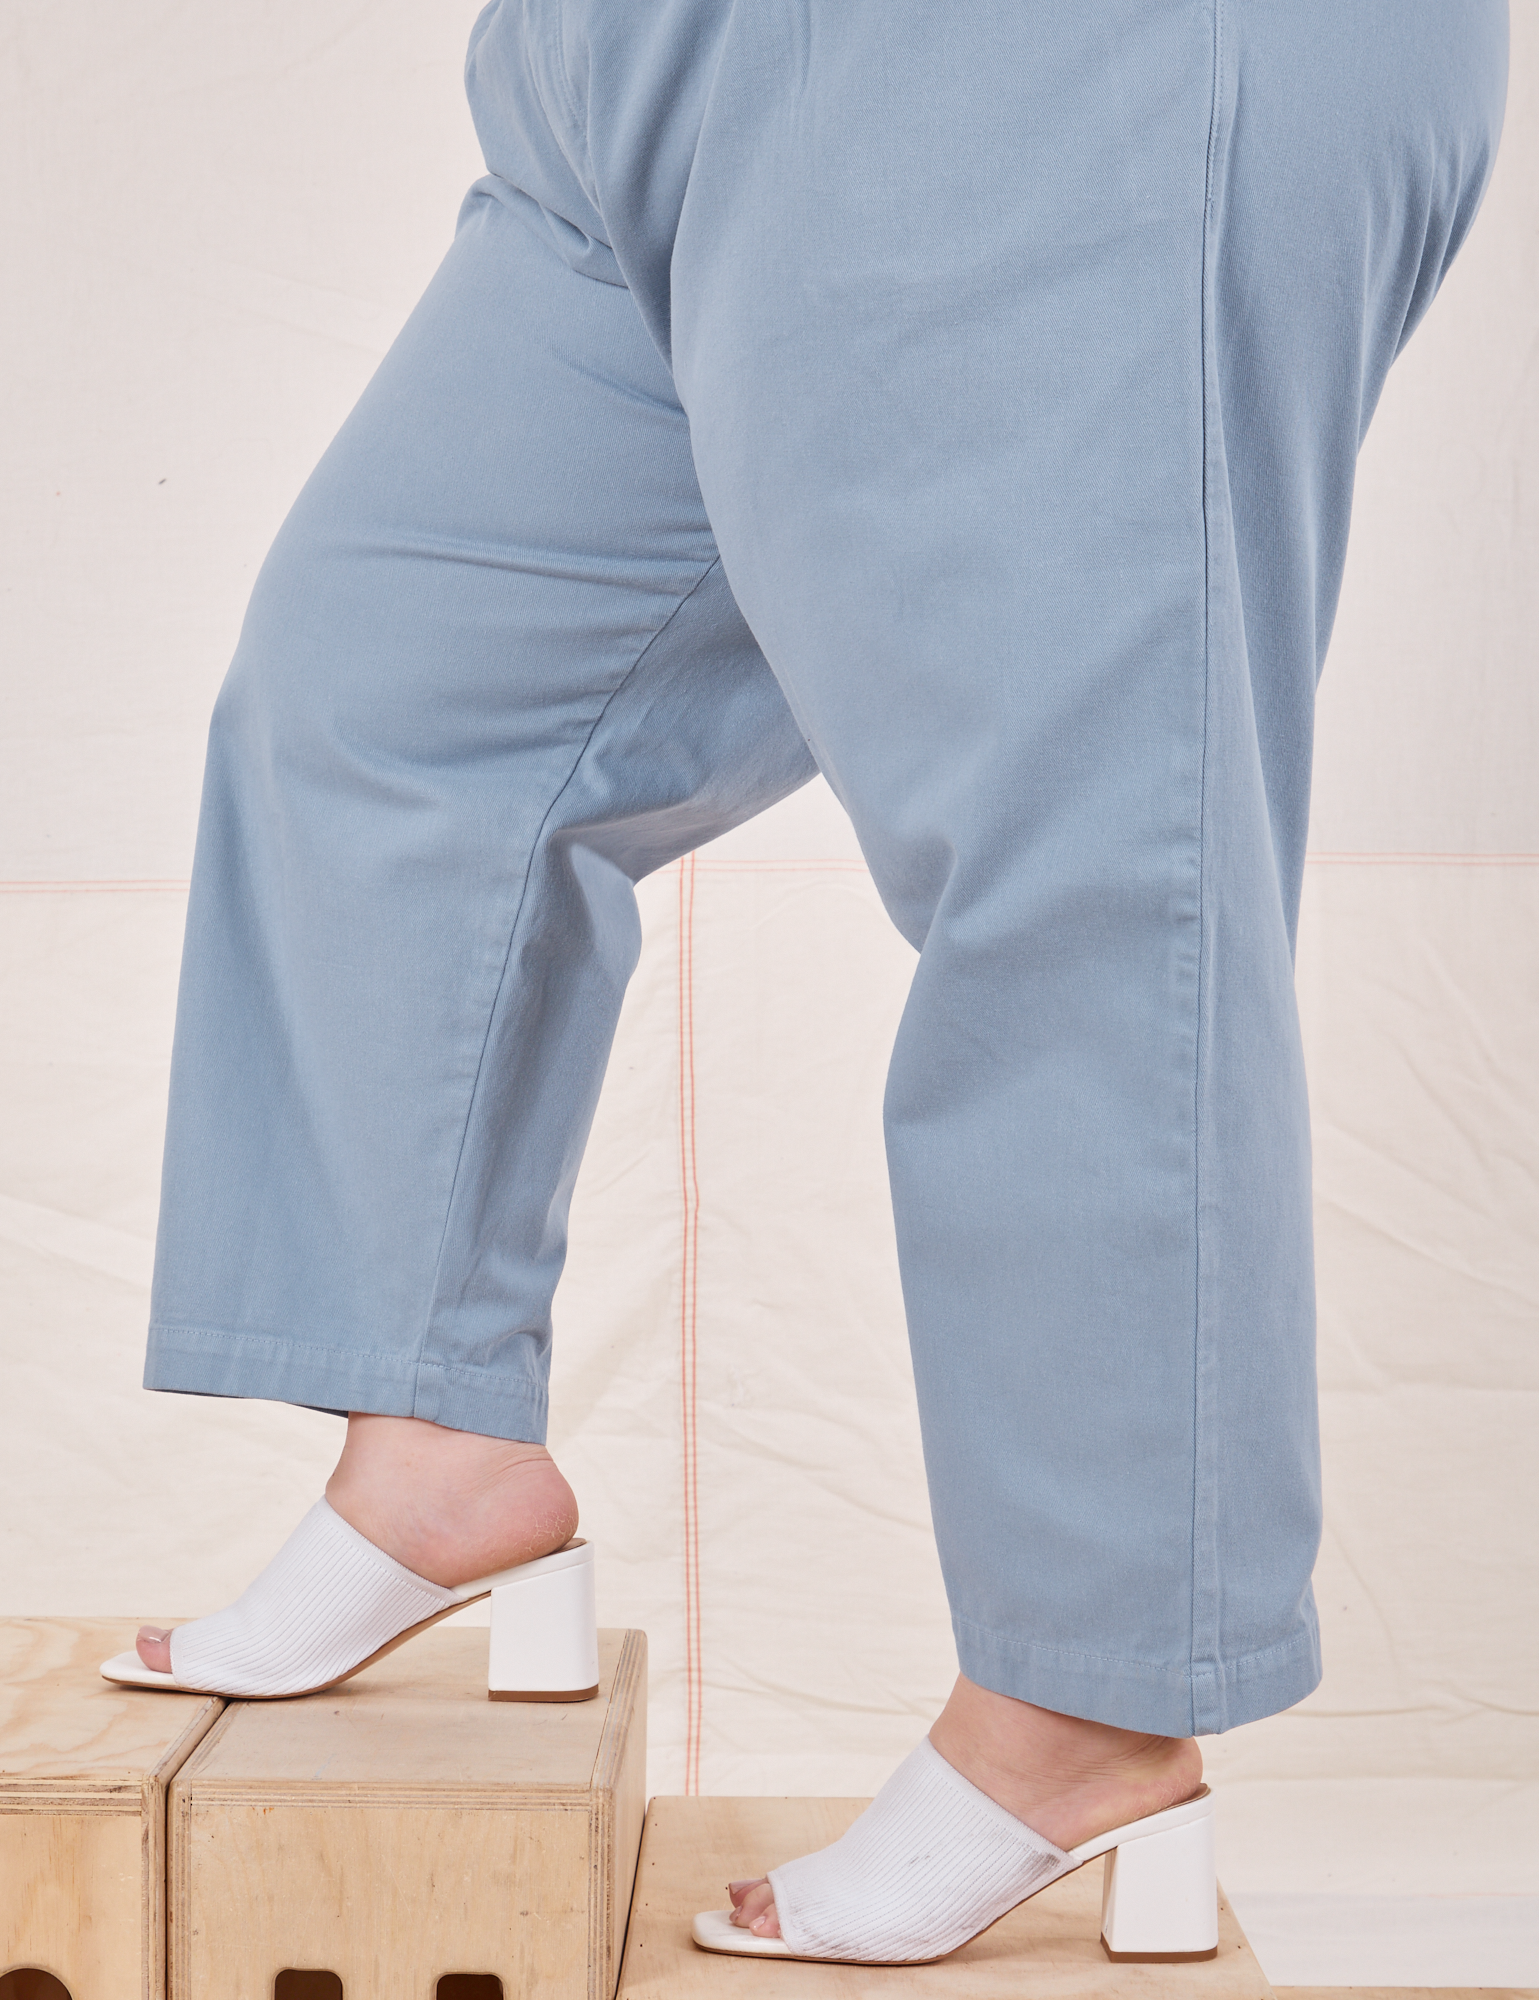 Heavyweight Trousers in Periwinkle pant leg close up on Ashley